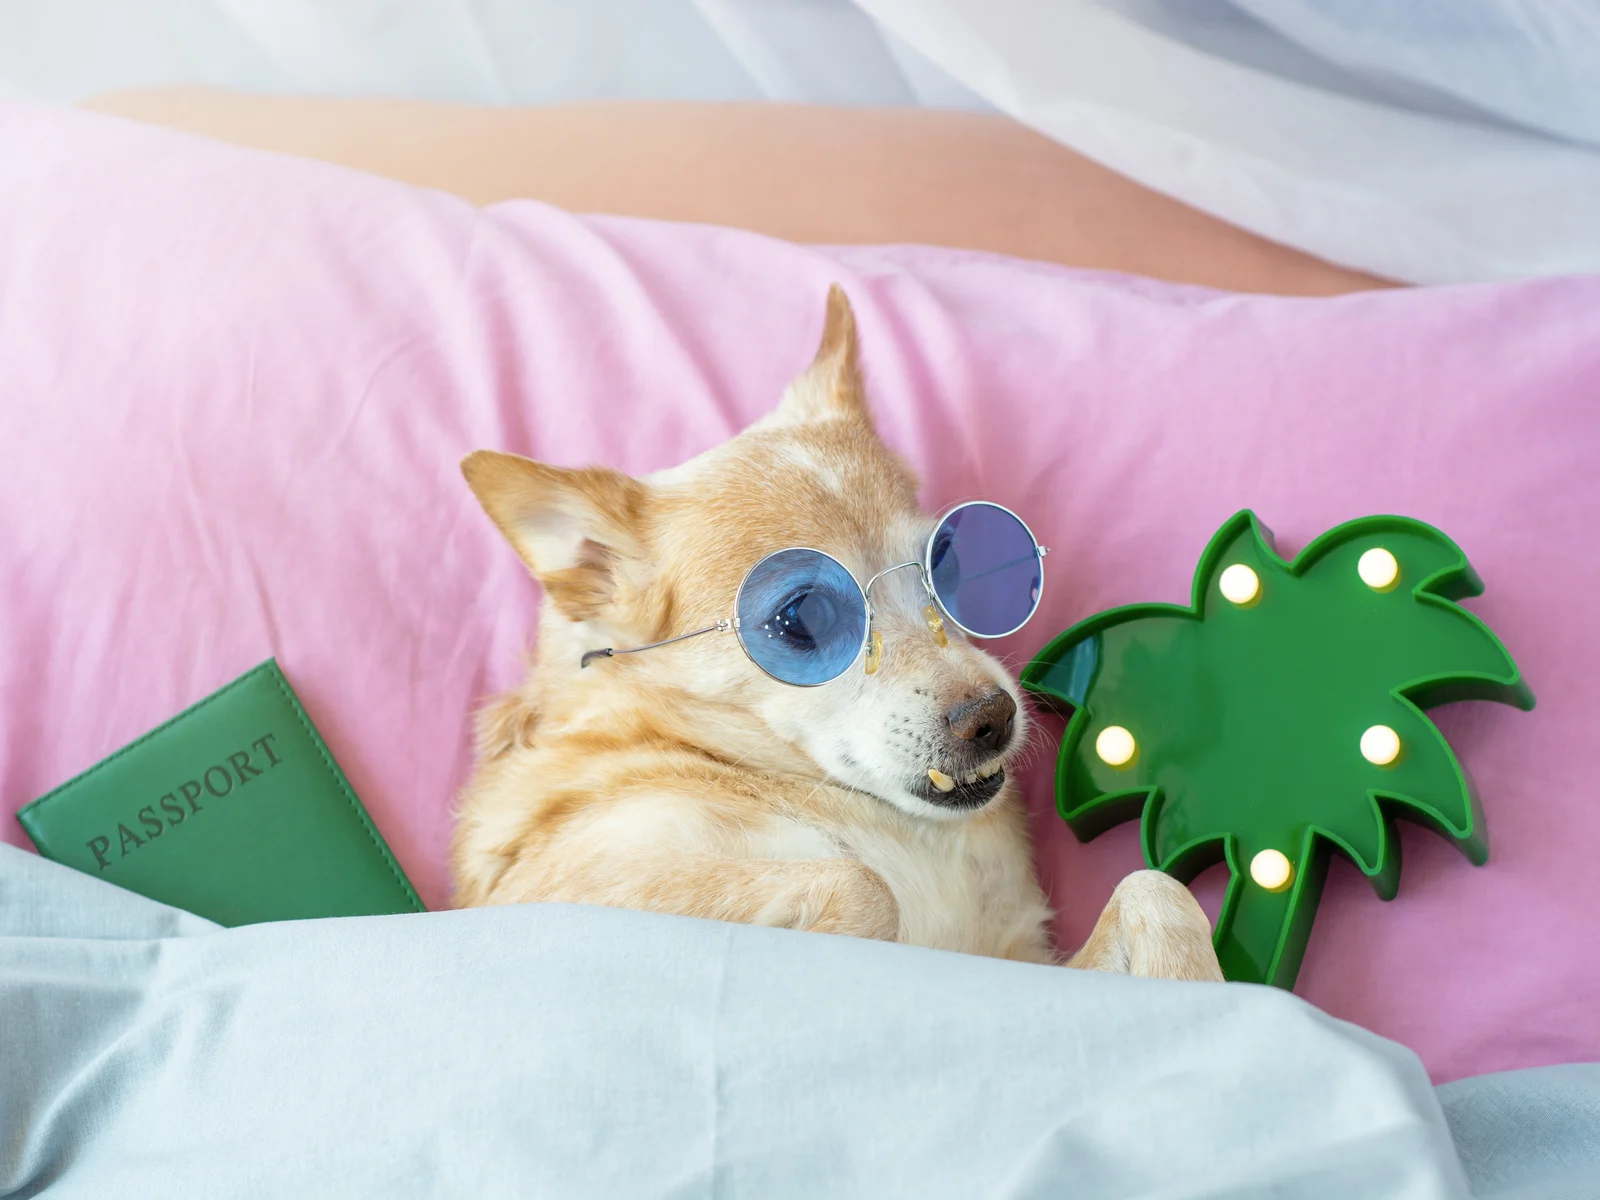 Dog wearing Lennon glasses and lying in the best travel dog bed next to a passport and a plastic lighted palm tree